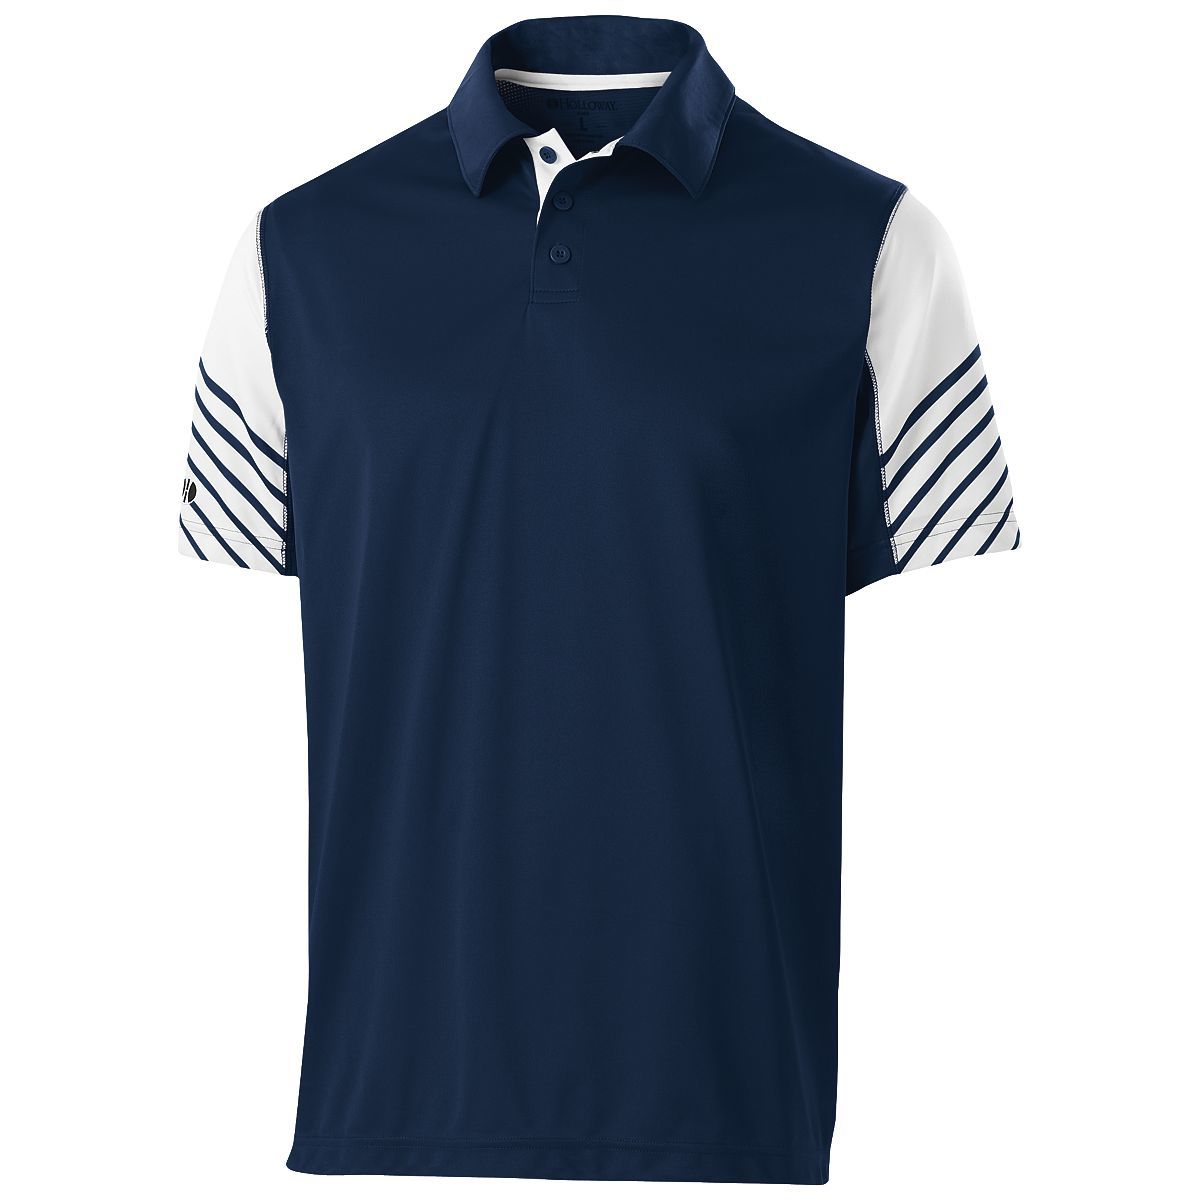 Holloway Arc Polo in Navy/White  -Part of the Adult, Adult-Polos, Polos, Holloway, Shirts product lines at KanaleyCreations.com